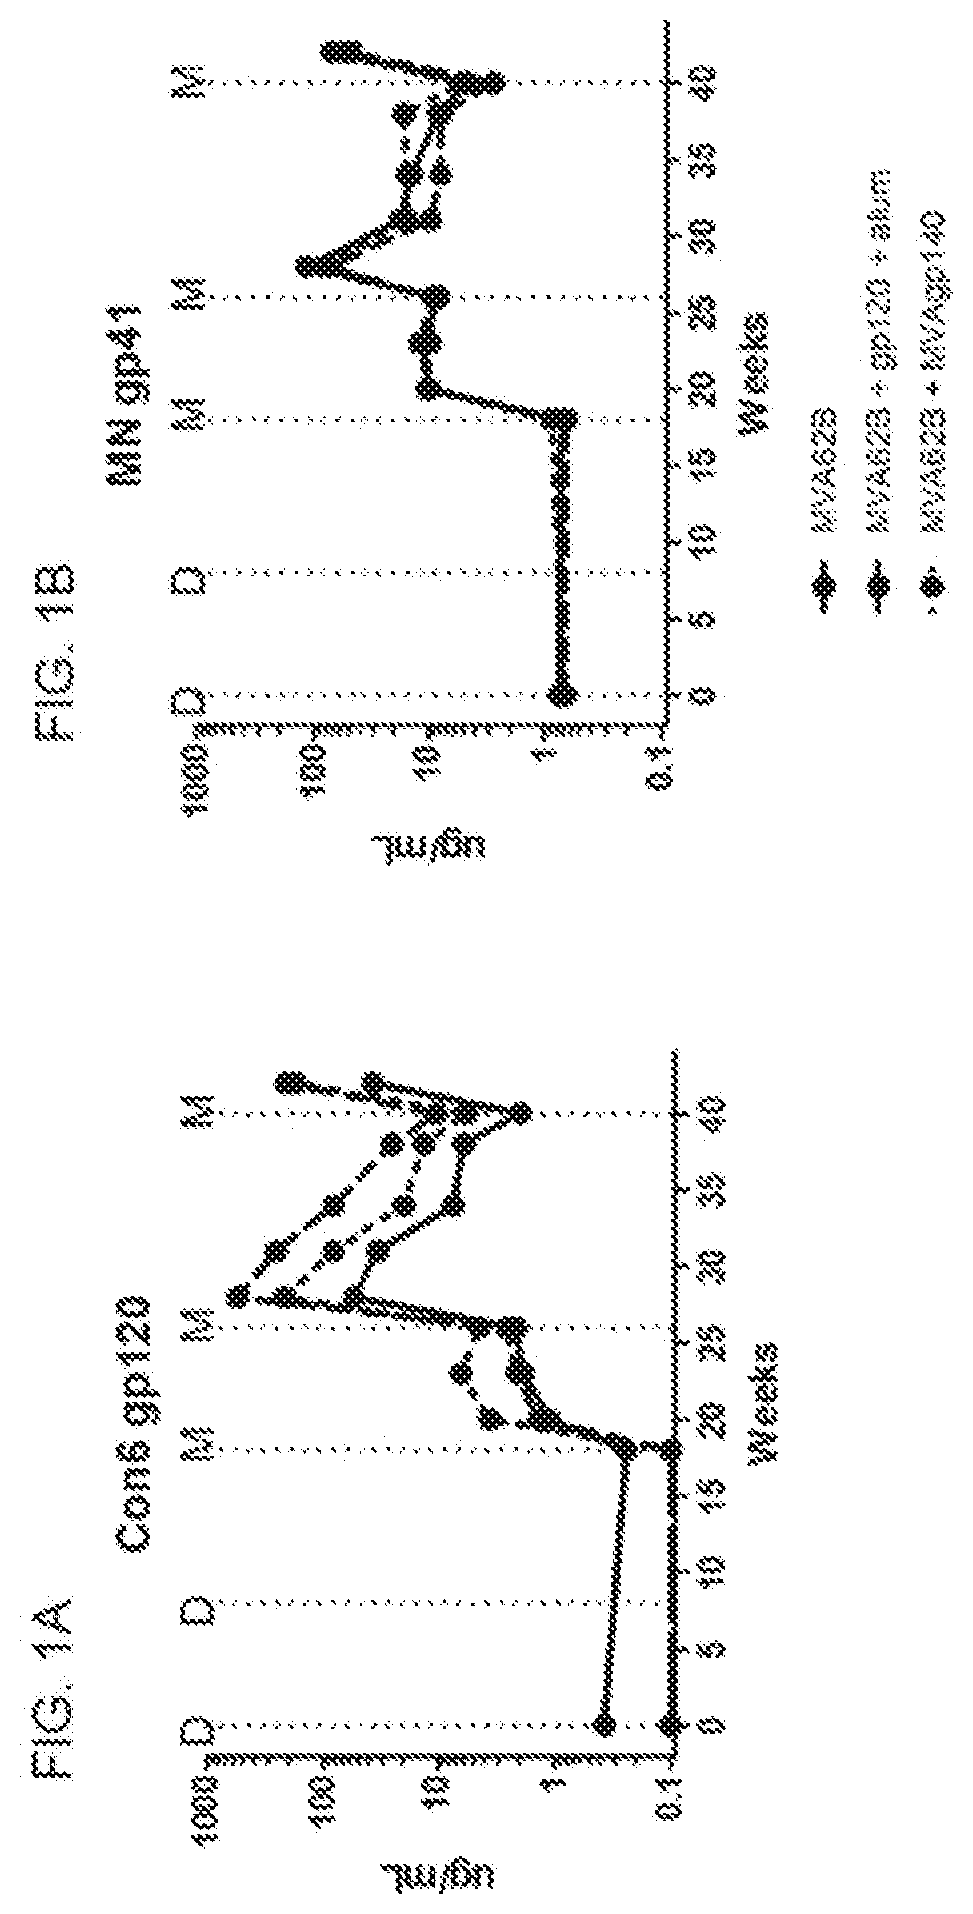 Multivalent HIV Vaccine Boost Compositions and Methods of Use